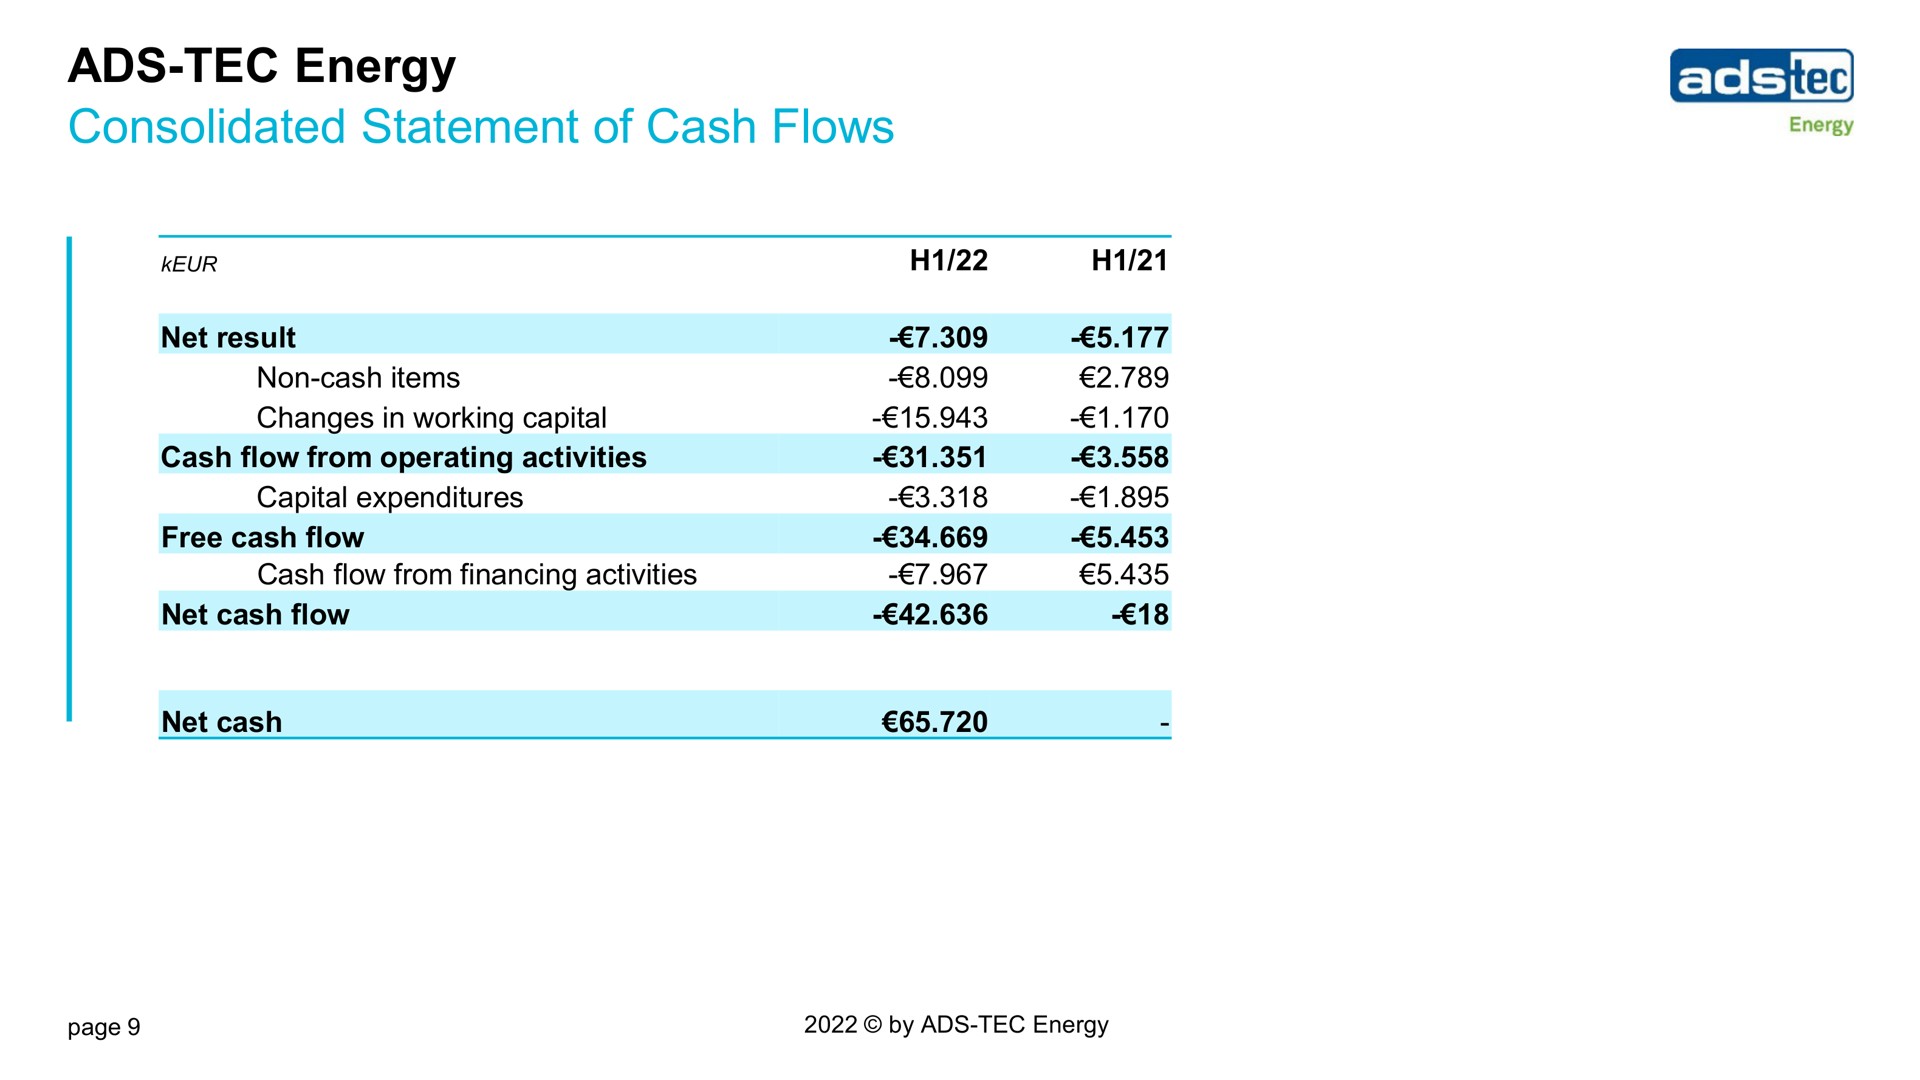 ads tec energy consolidated statement of cash flows | ads-tec Energy